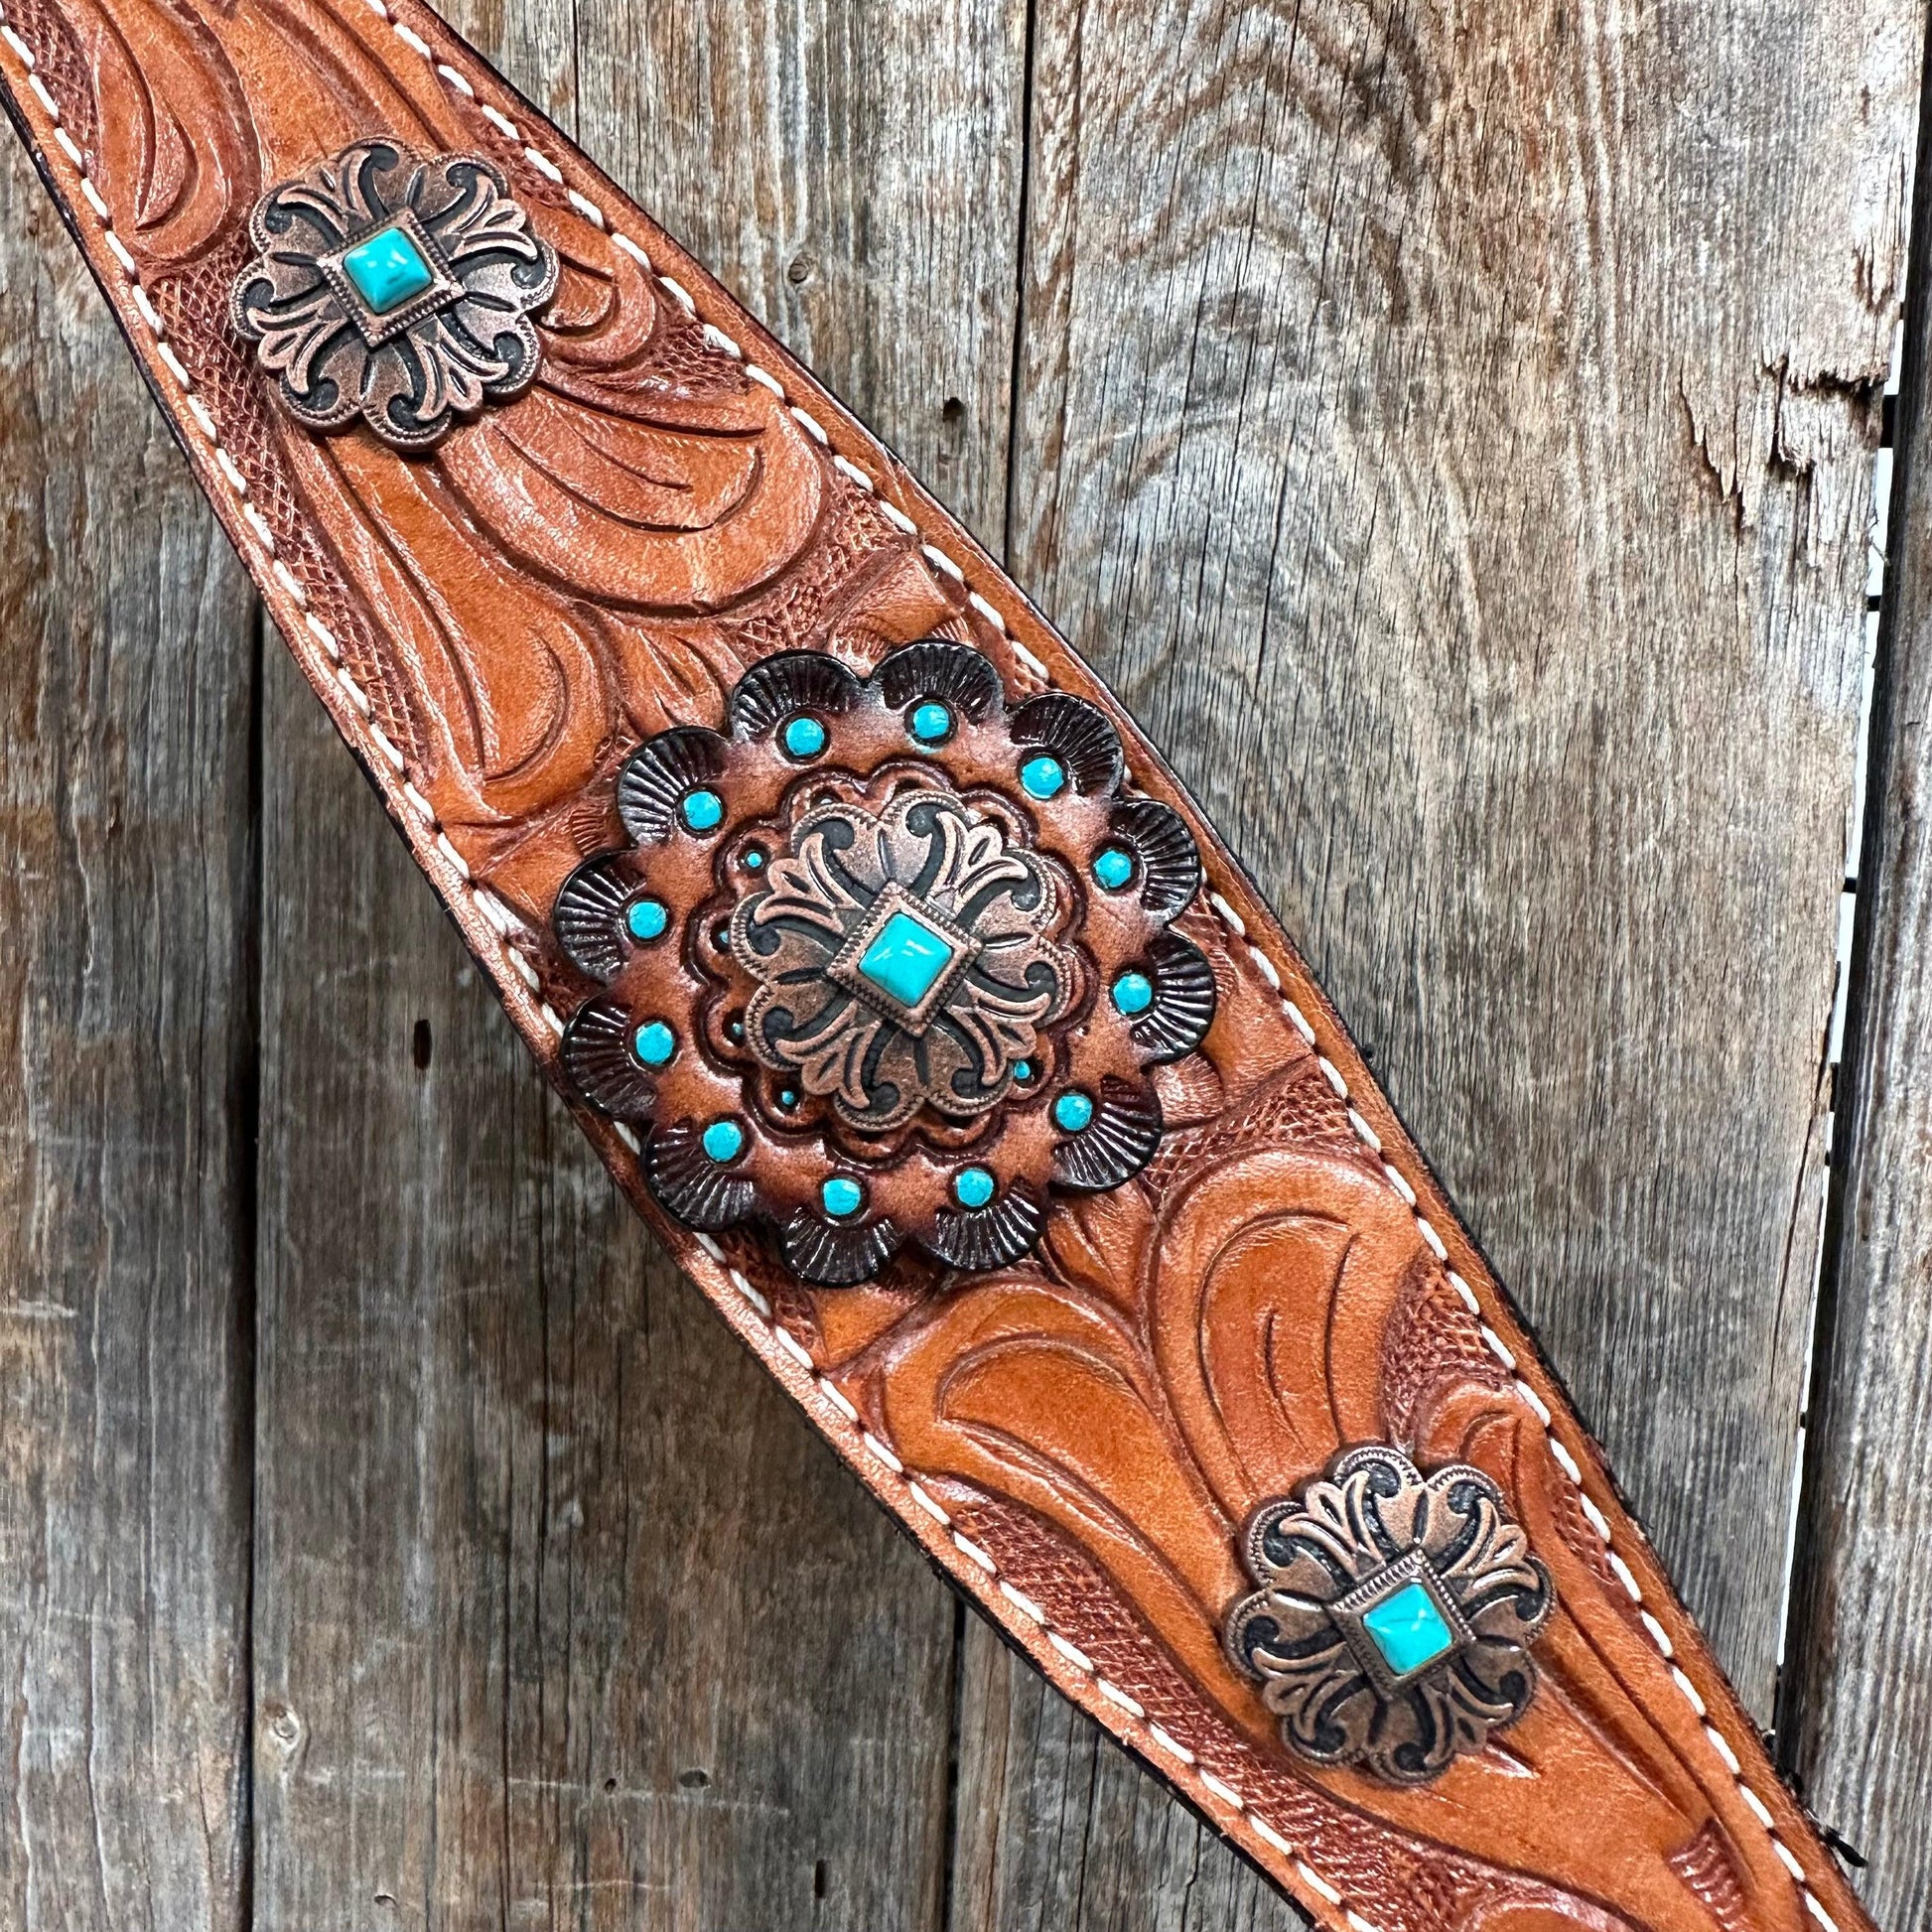 Light Oil V Brow Copper and Turquoise Browband & Breastcollar Tack Set #BBBC557 - RODEO DRIVE